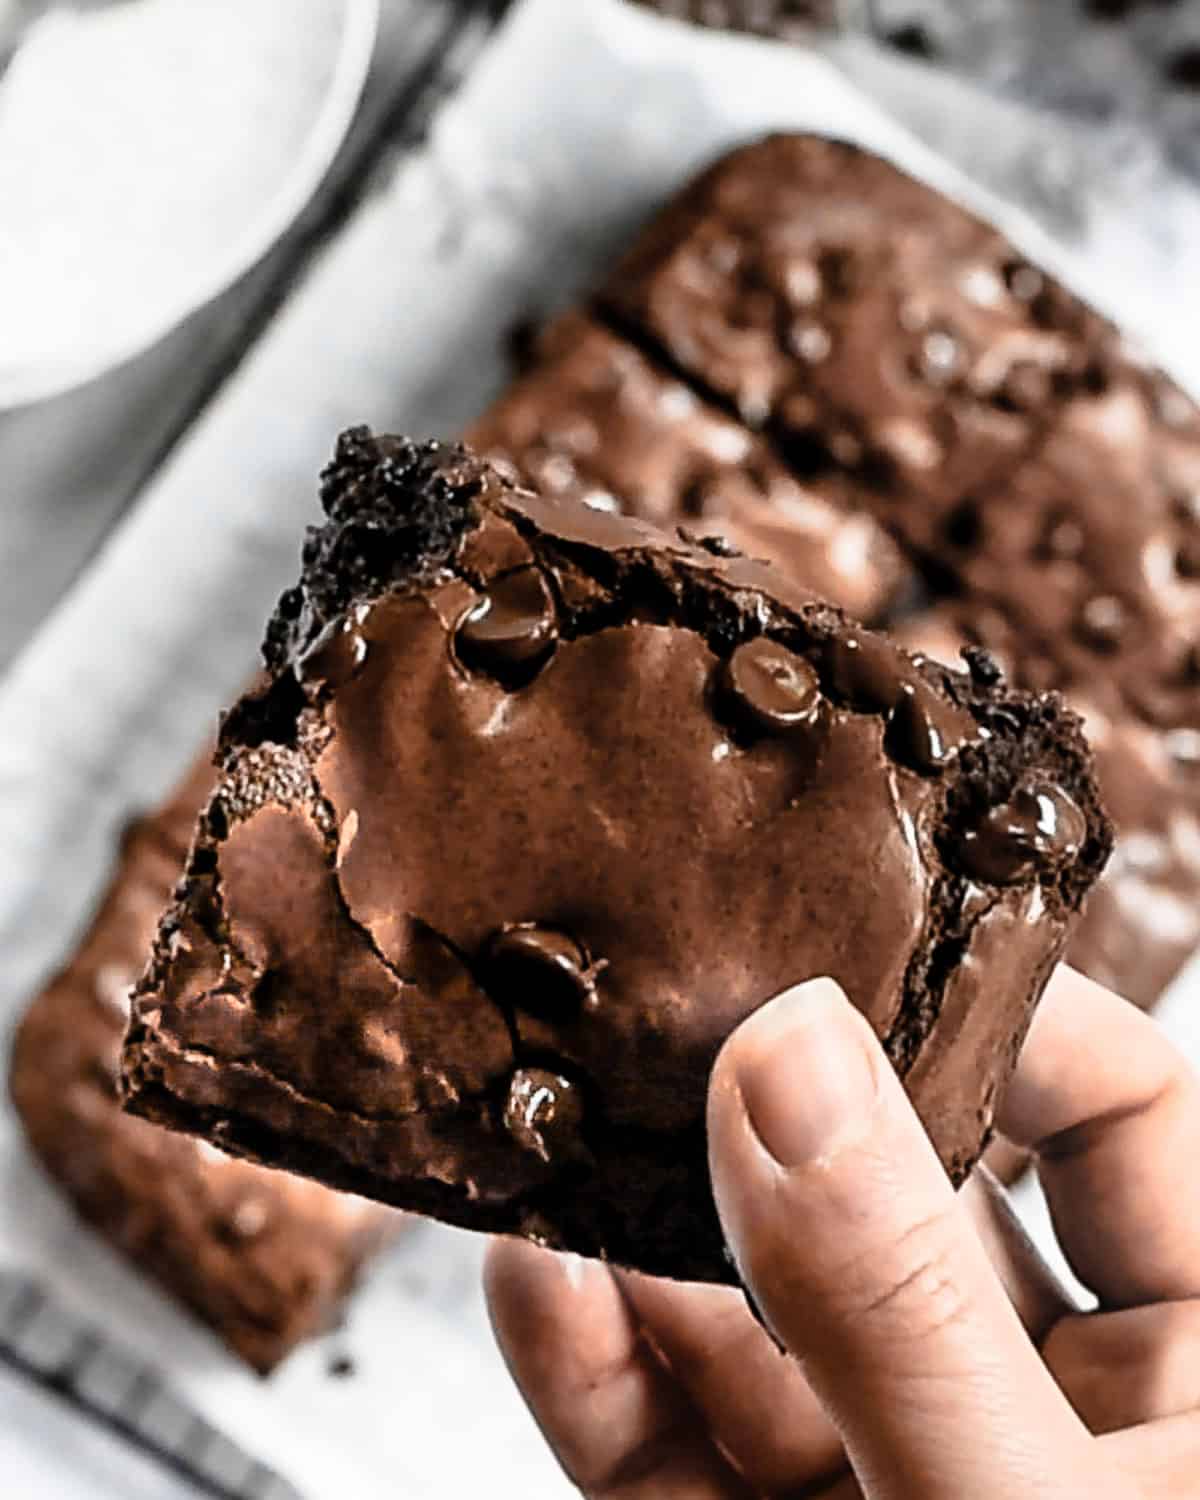 A finished brownie being held close up.